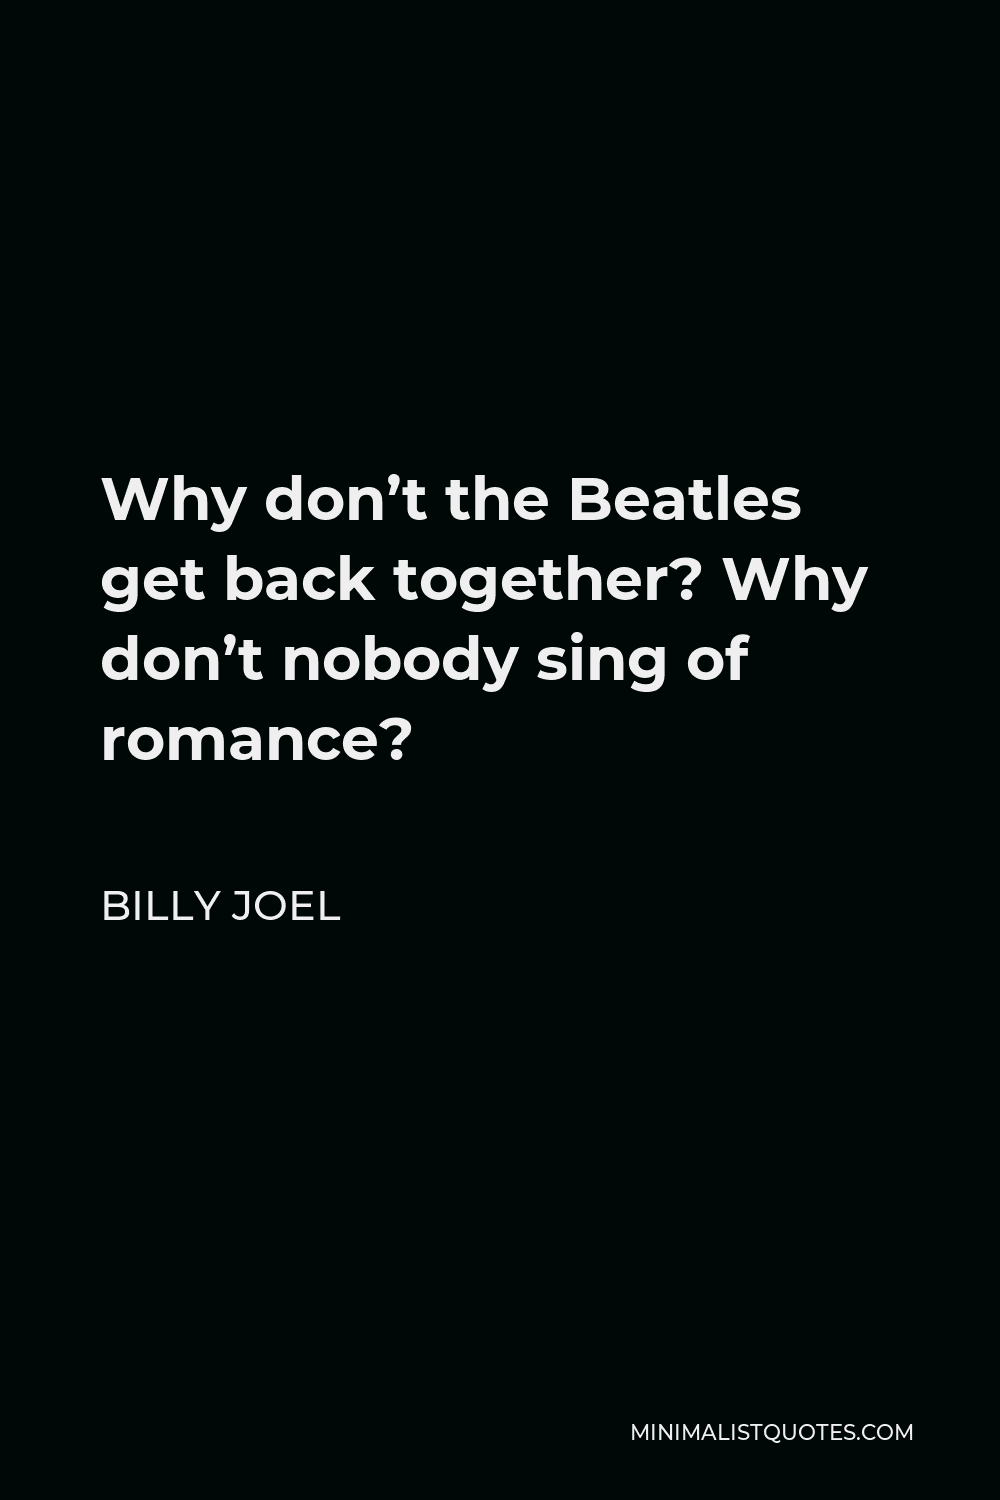 Billy Joel Quote - Why don’t the Beatles get back together? Why don’t nobody sing of romance?